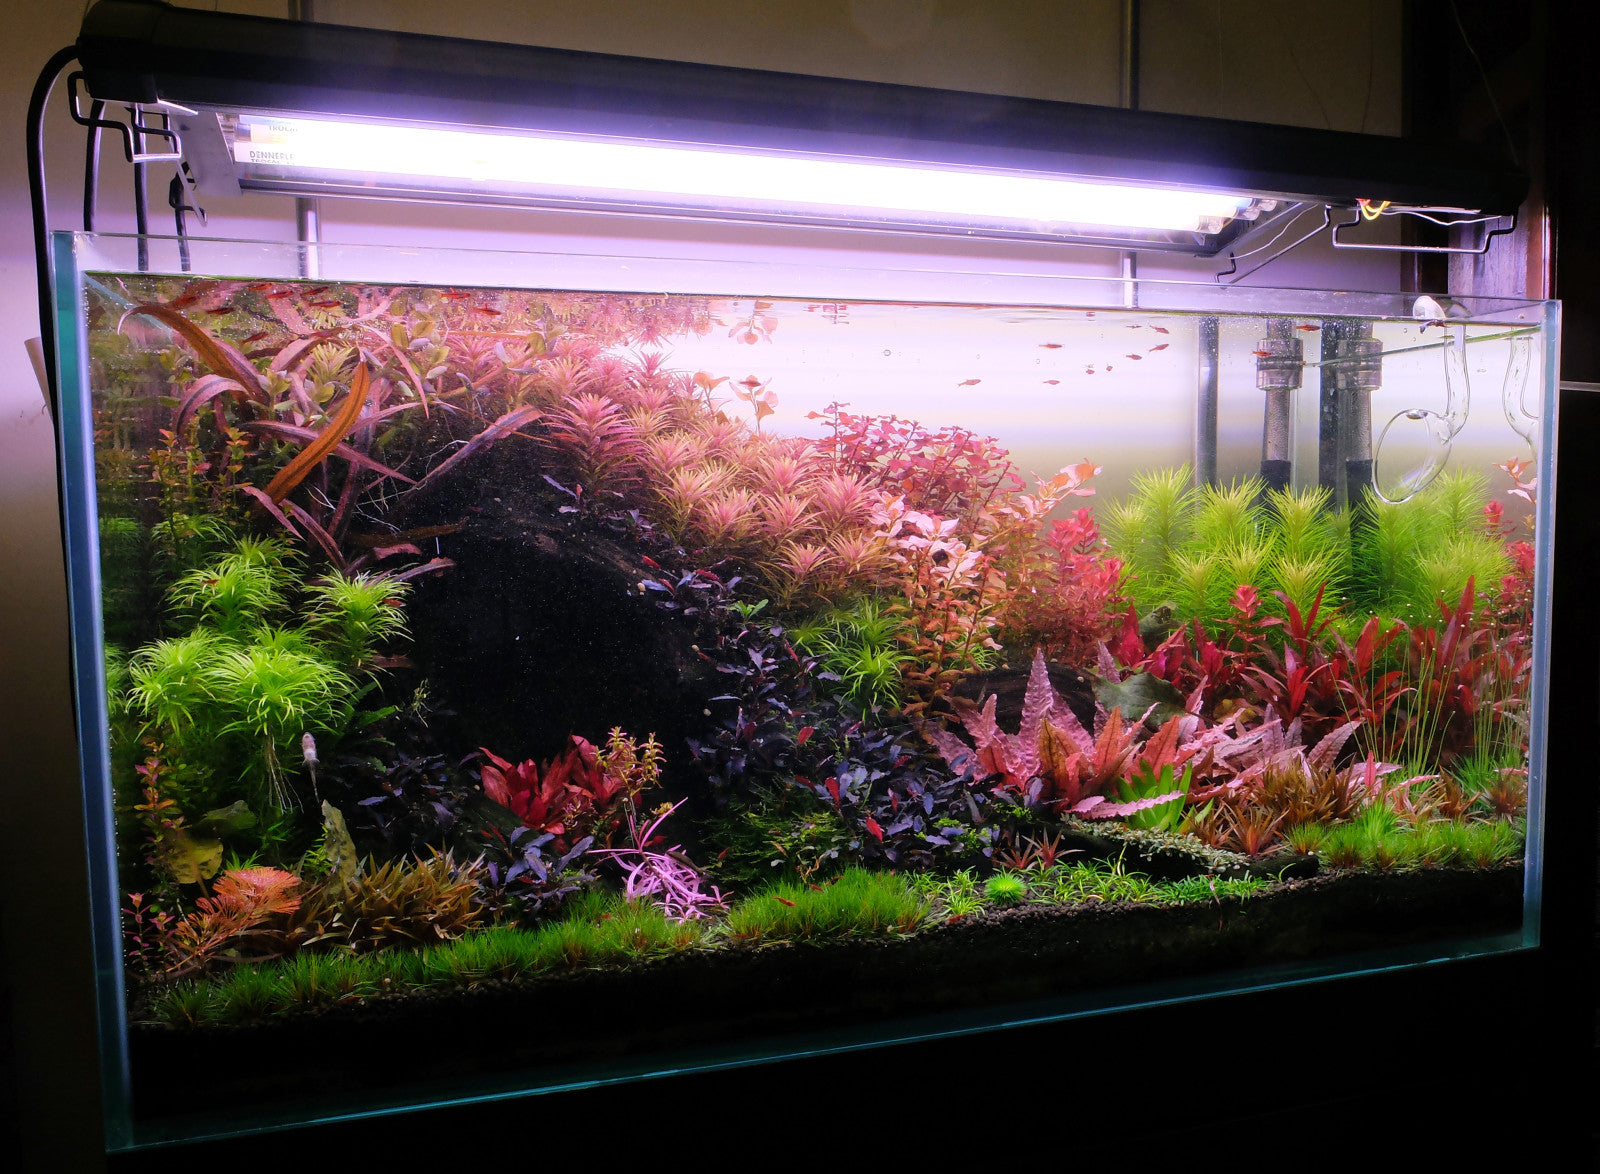 Dennis's tank with T5 Tubs for planted tank lights